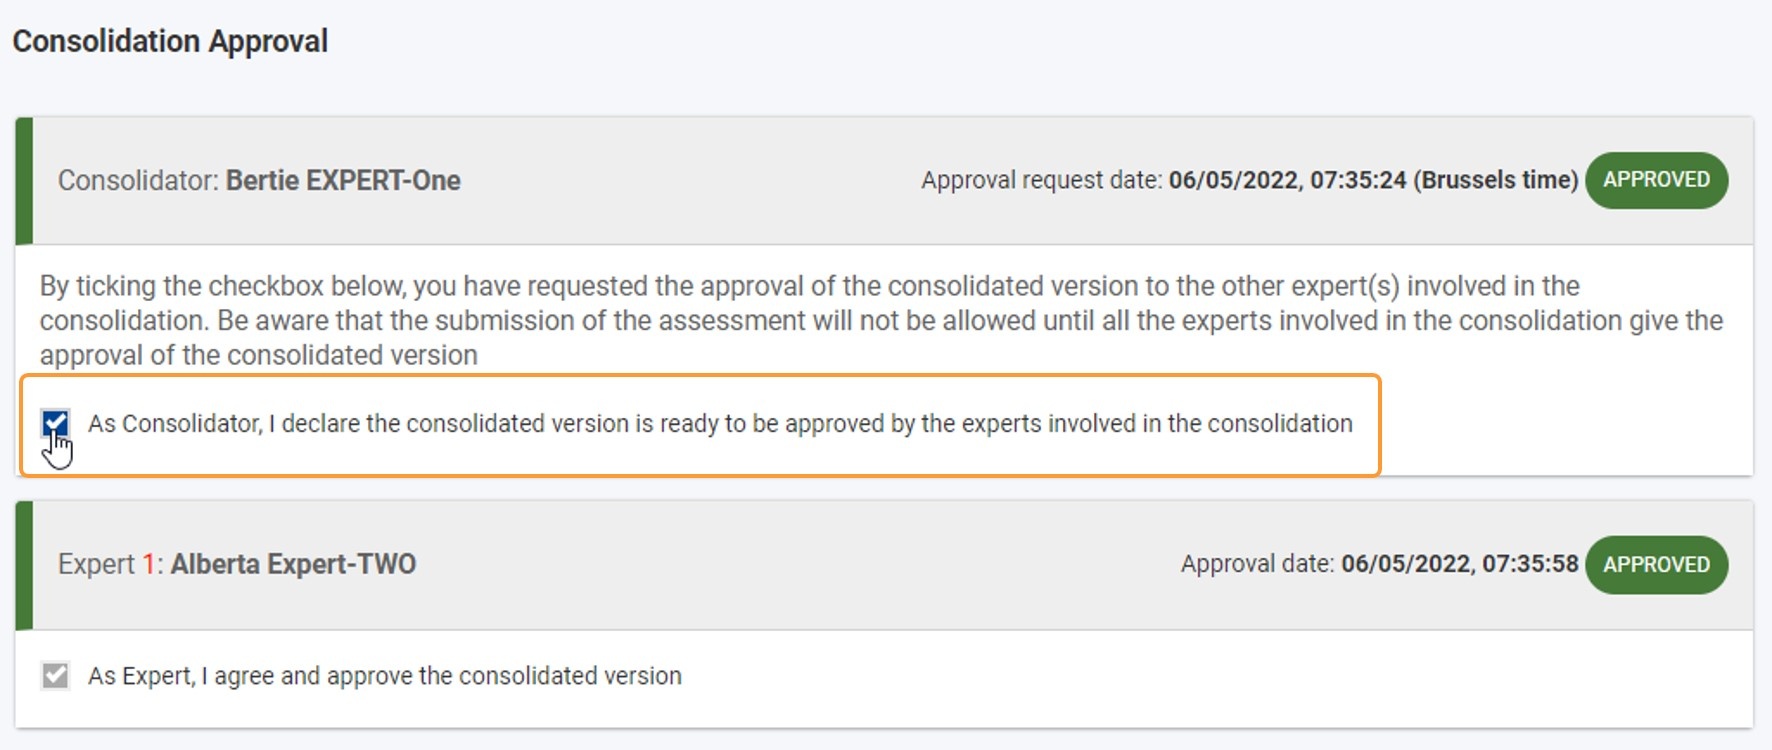 Untick the consolidator approval request tick box